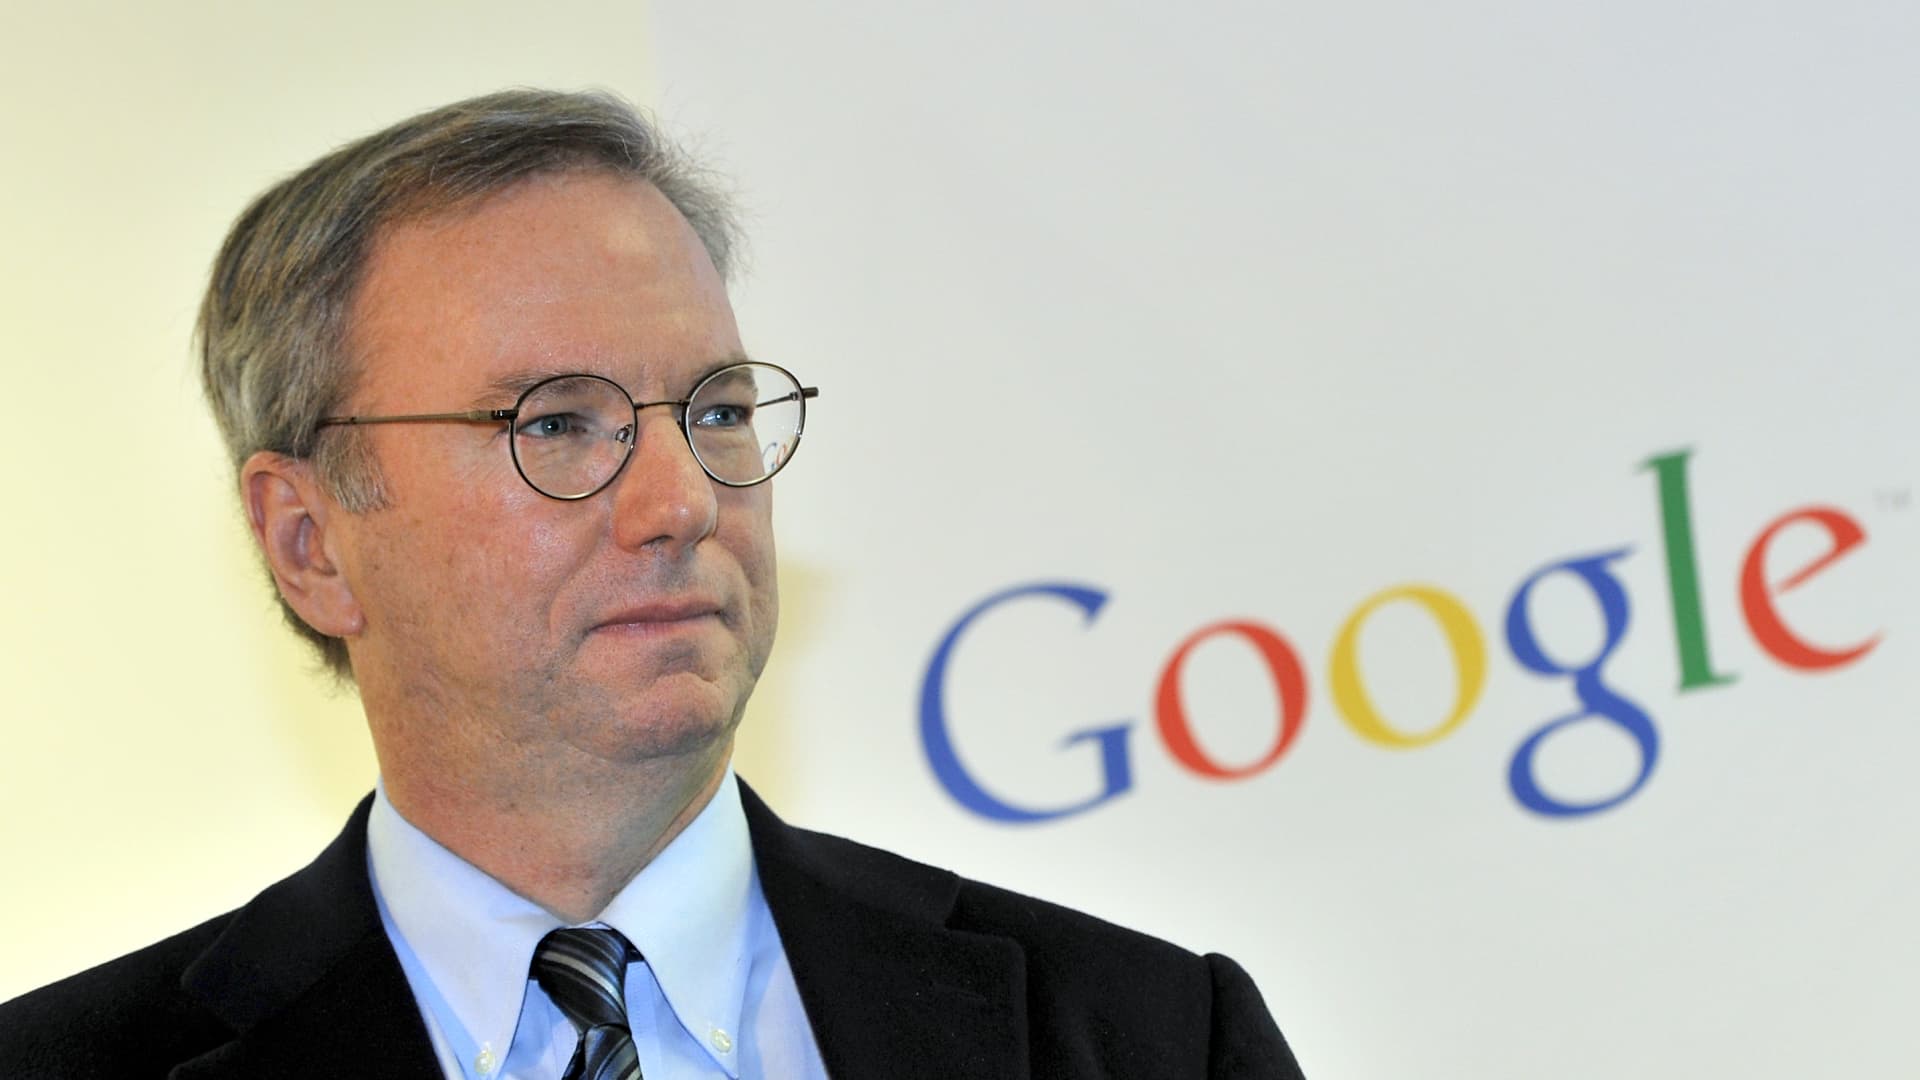 How Google’s former CEO Eric Schmidt helped write A.I. laws in Washington without publicly disclosing investments in A.I. startups